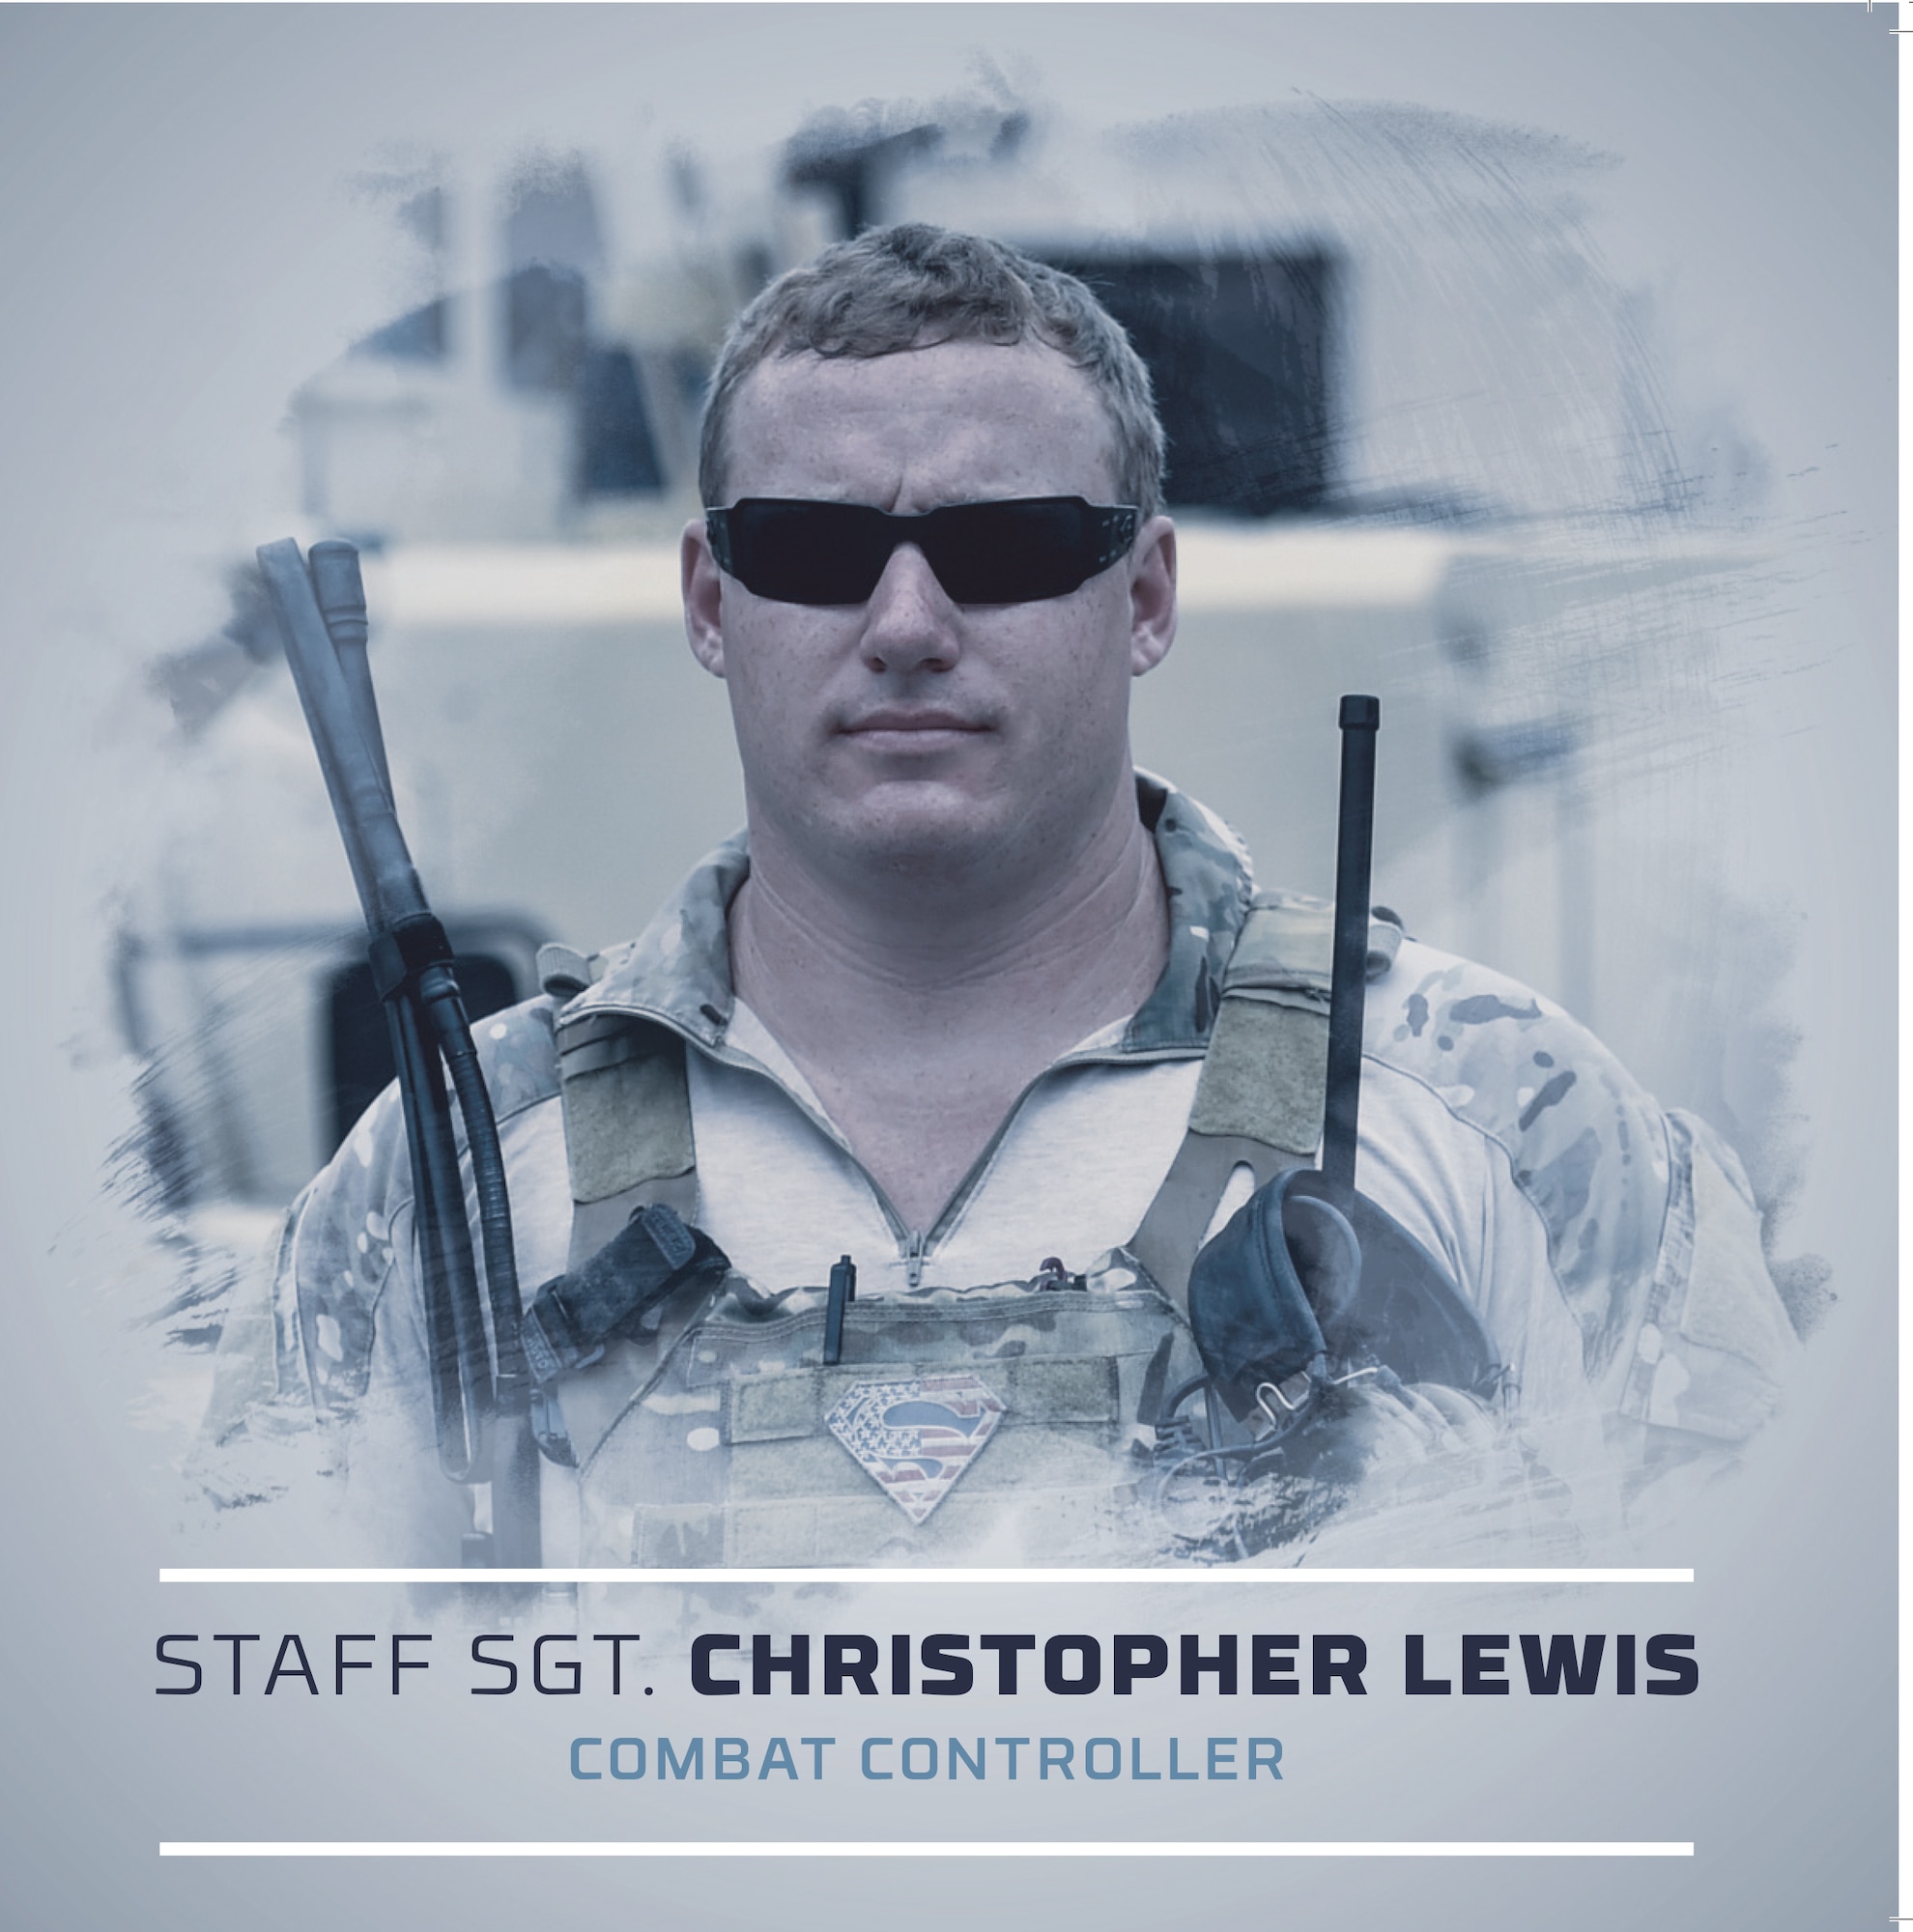 Staff Sgt. Christopher Lewis